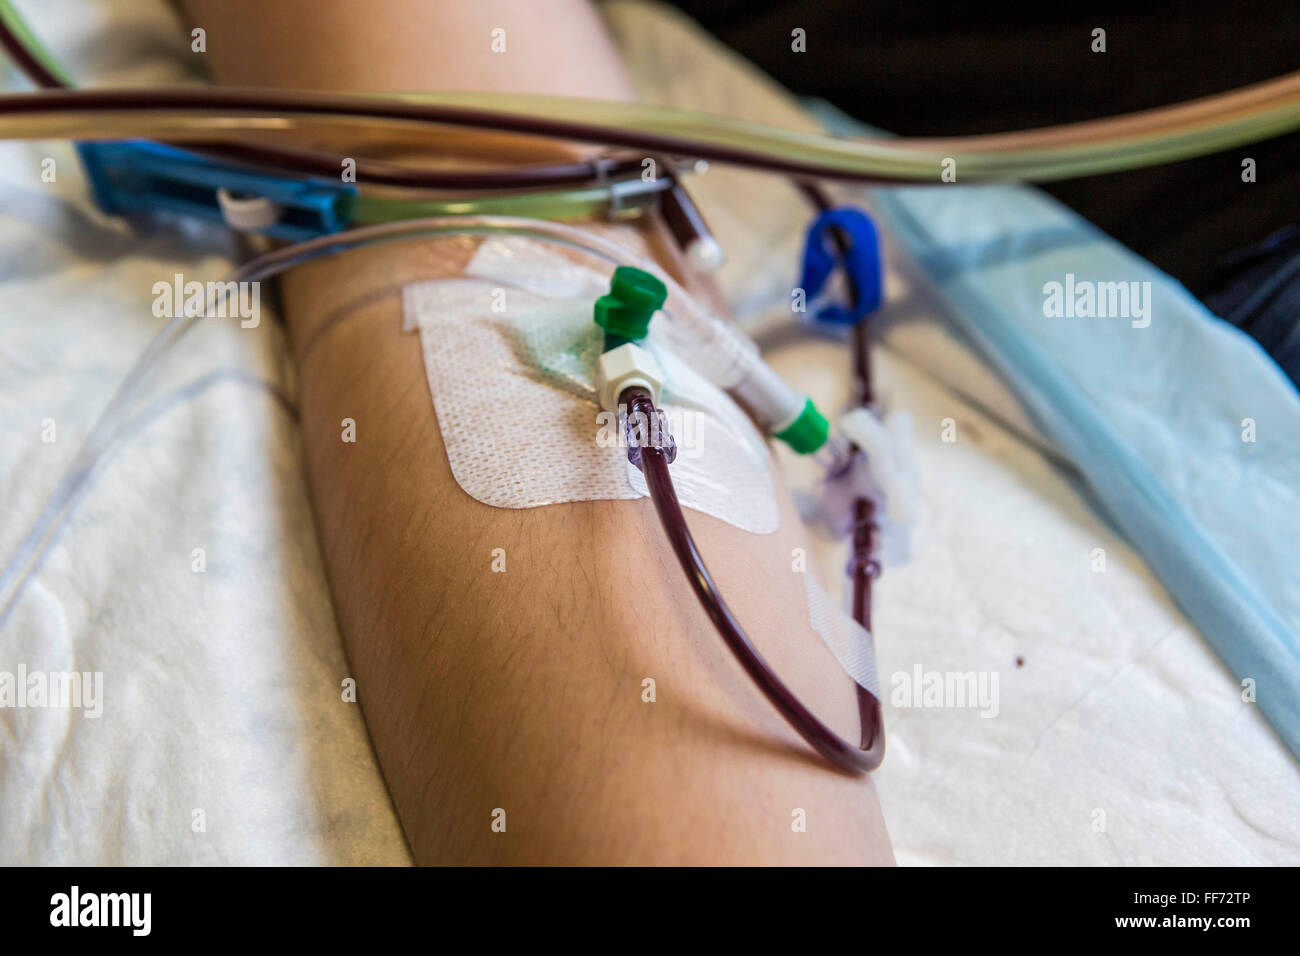 A cannula placed into a patient’s arm to collect blood for a stem cell donation transfusion in the London clinic, London, United Kingdom.  Once the stem cells have been separated off, the blood is return to the patient’s through their arm. Stock Photo